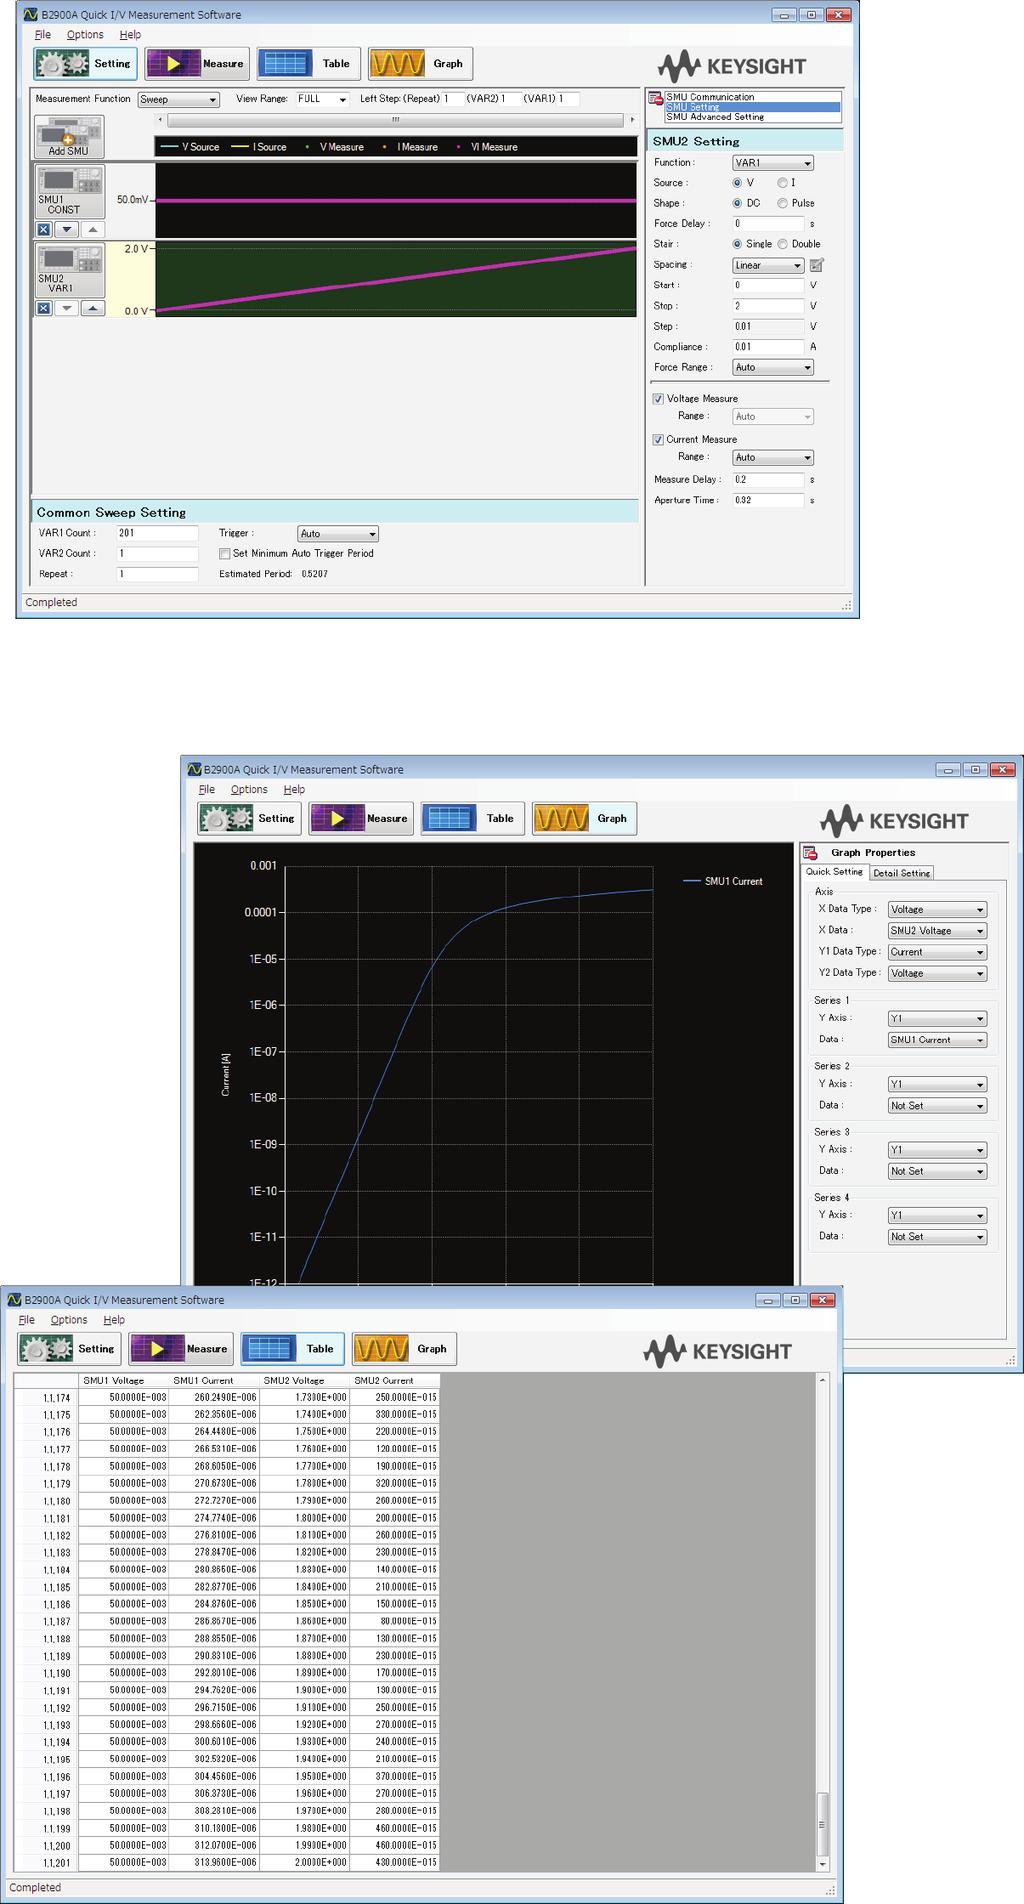 05 Keysight FET Characterization Using the B2900A Series of SMUs - Technical Overview Ready-to-use PC software In addition to its powerful and easy-to-use GUI, the B2900A Series of SMUs comes with